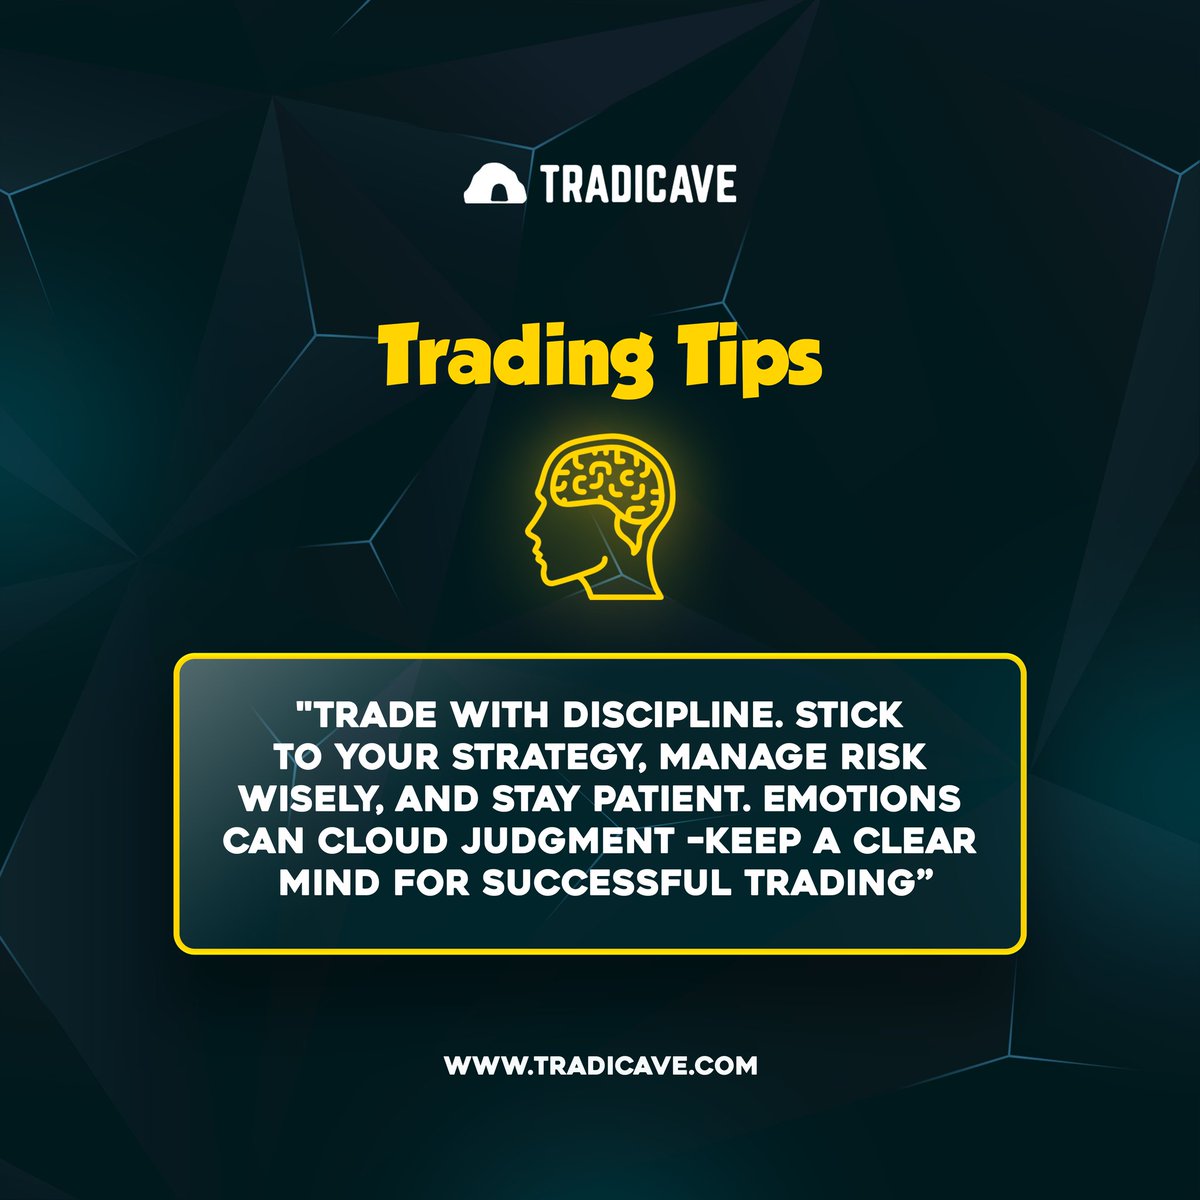 Comment Down Your Thoughts👇 Follow @Tradicave For more visit: tradicave.com #tradicave #propfirm #proptrading #propfirmtrader #forextrading #smc #moneymindset #financialfreedom #explore